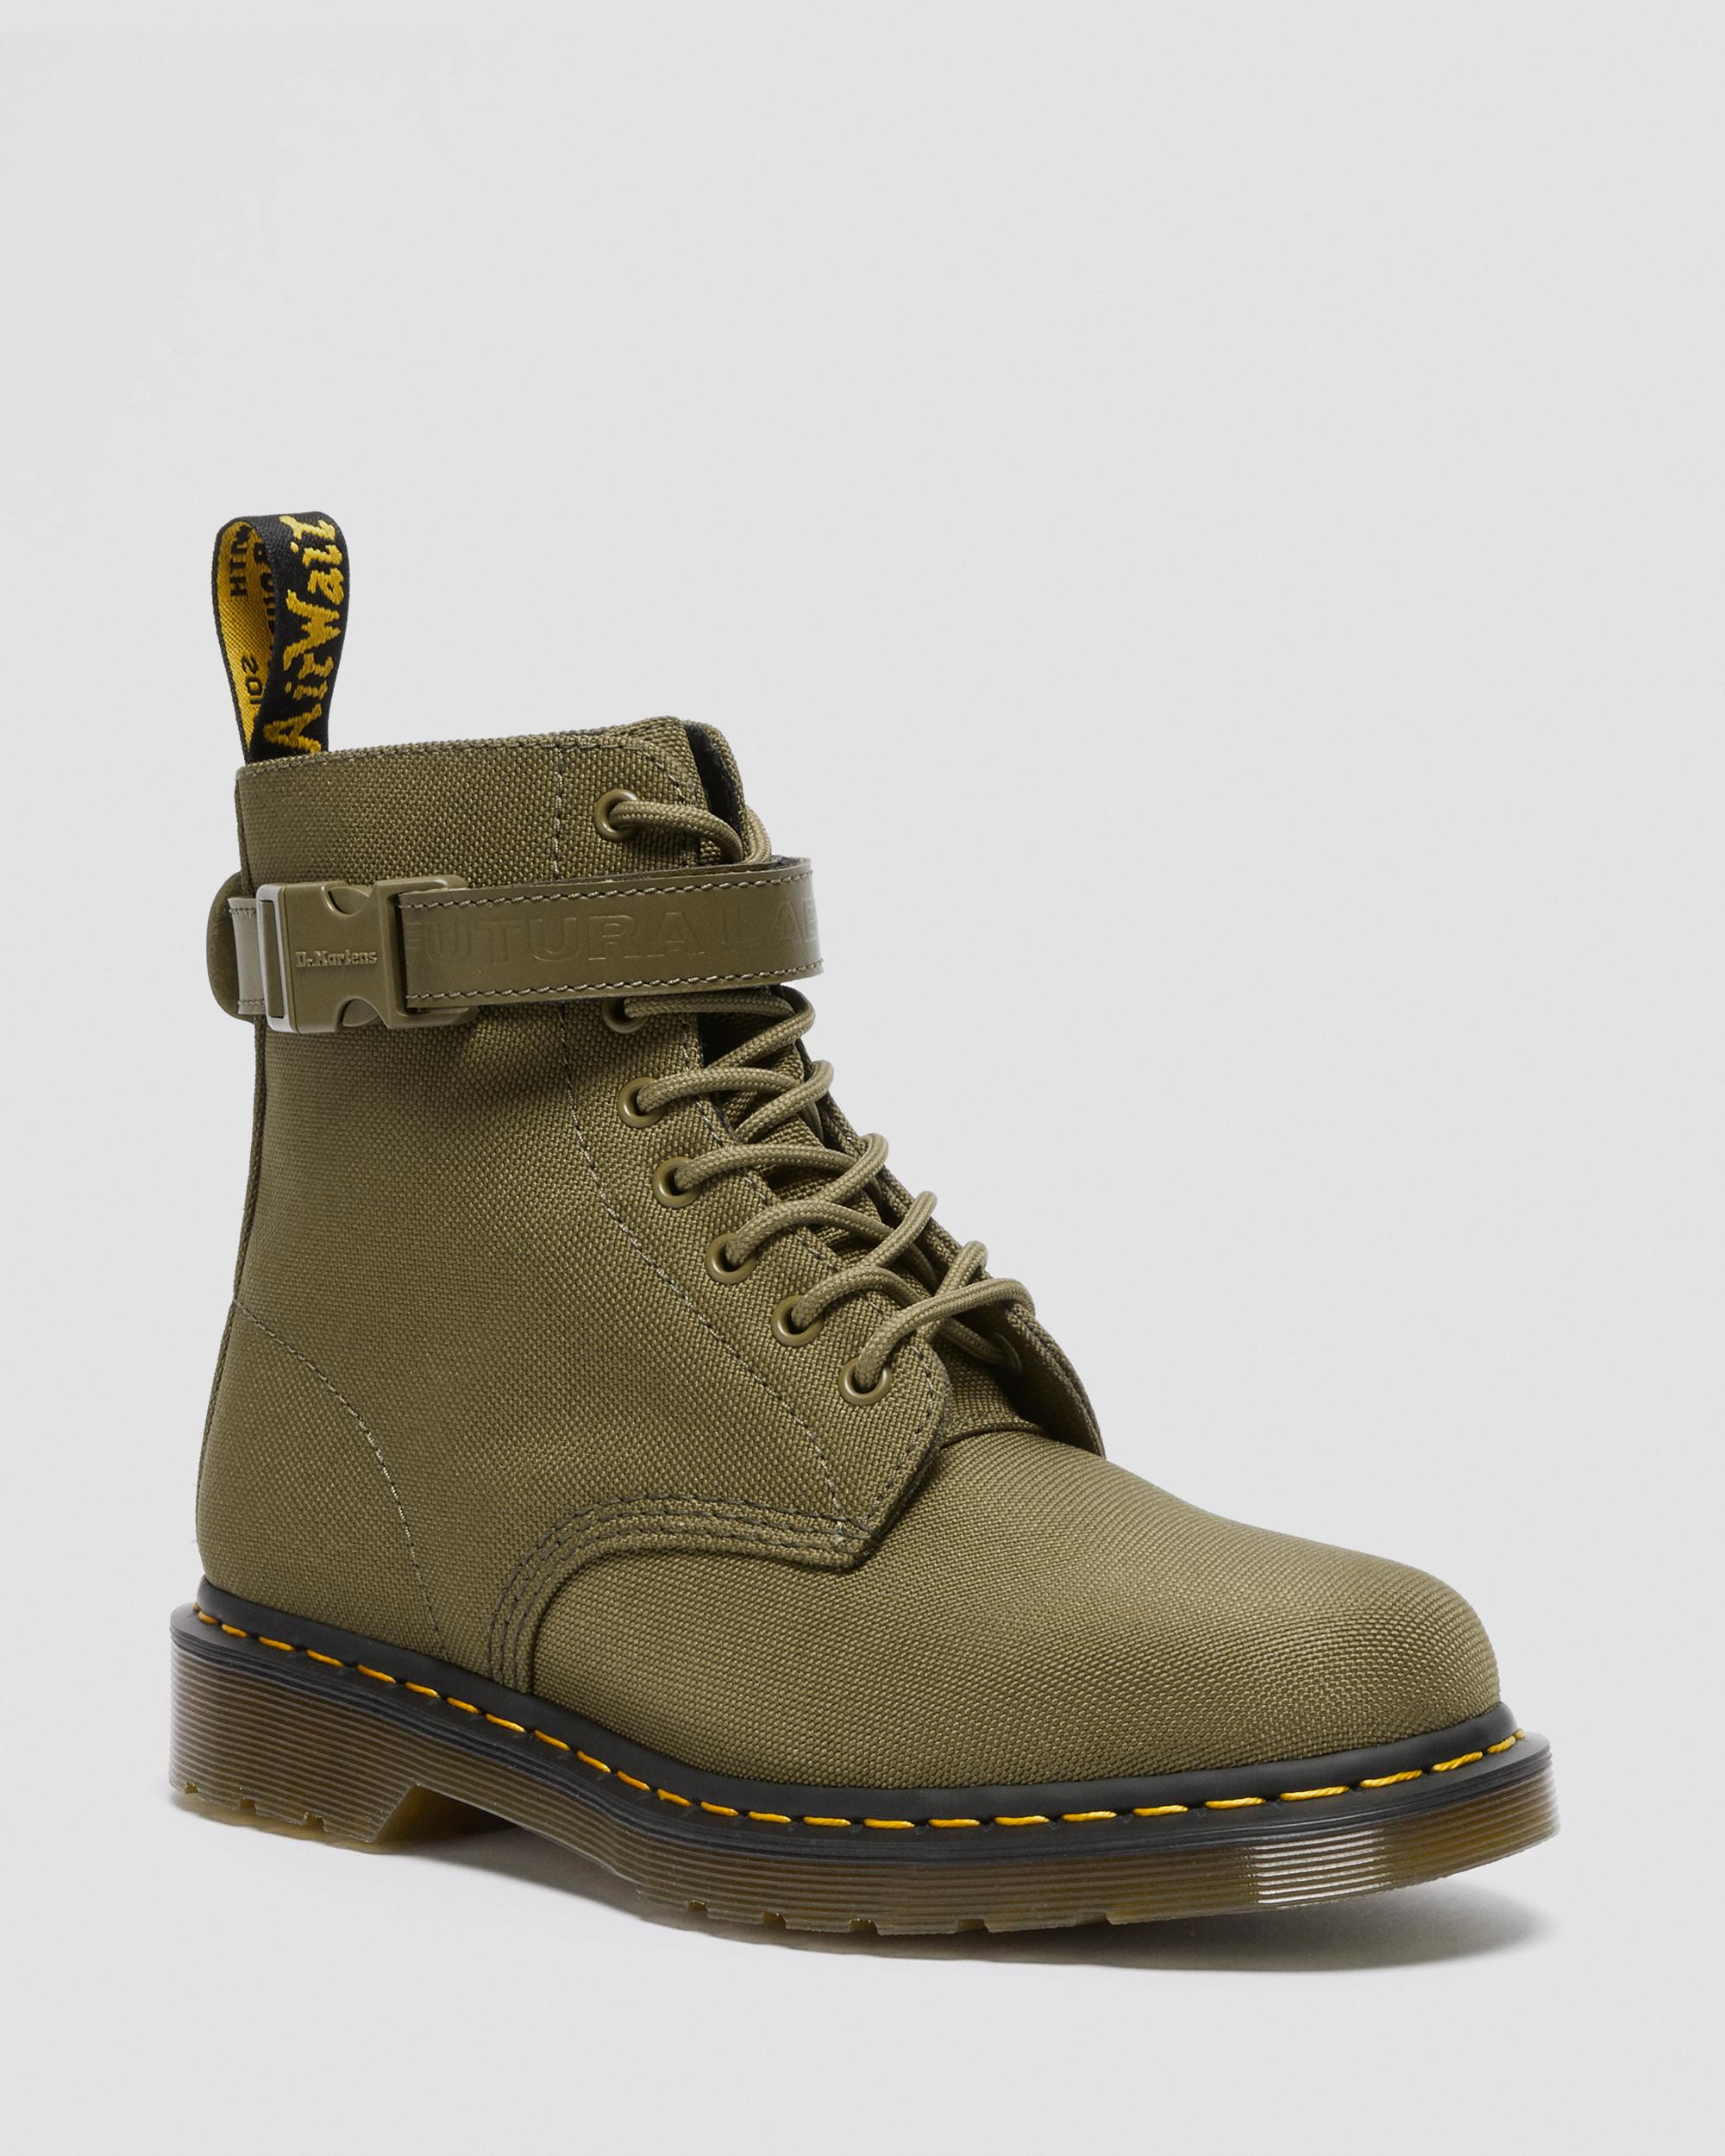 DR MARTENS 1460 Futura Olive Strap Lace Up Boots